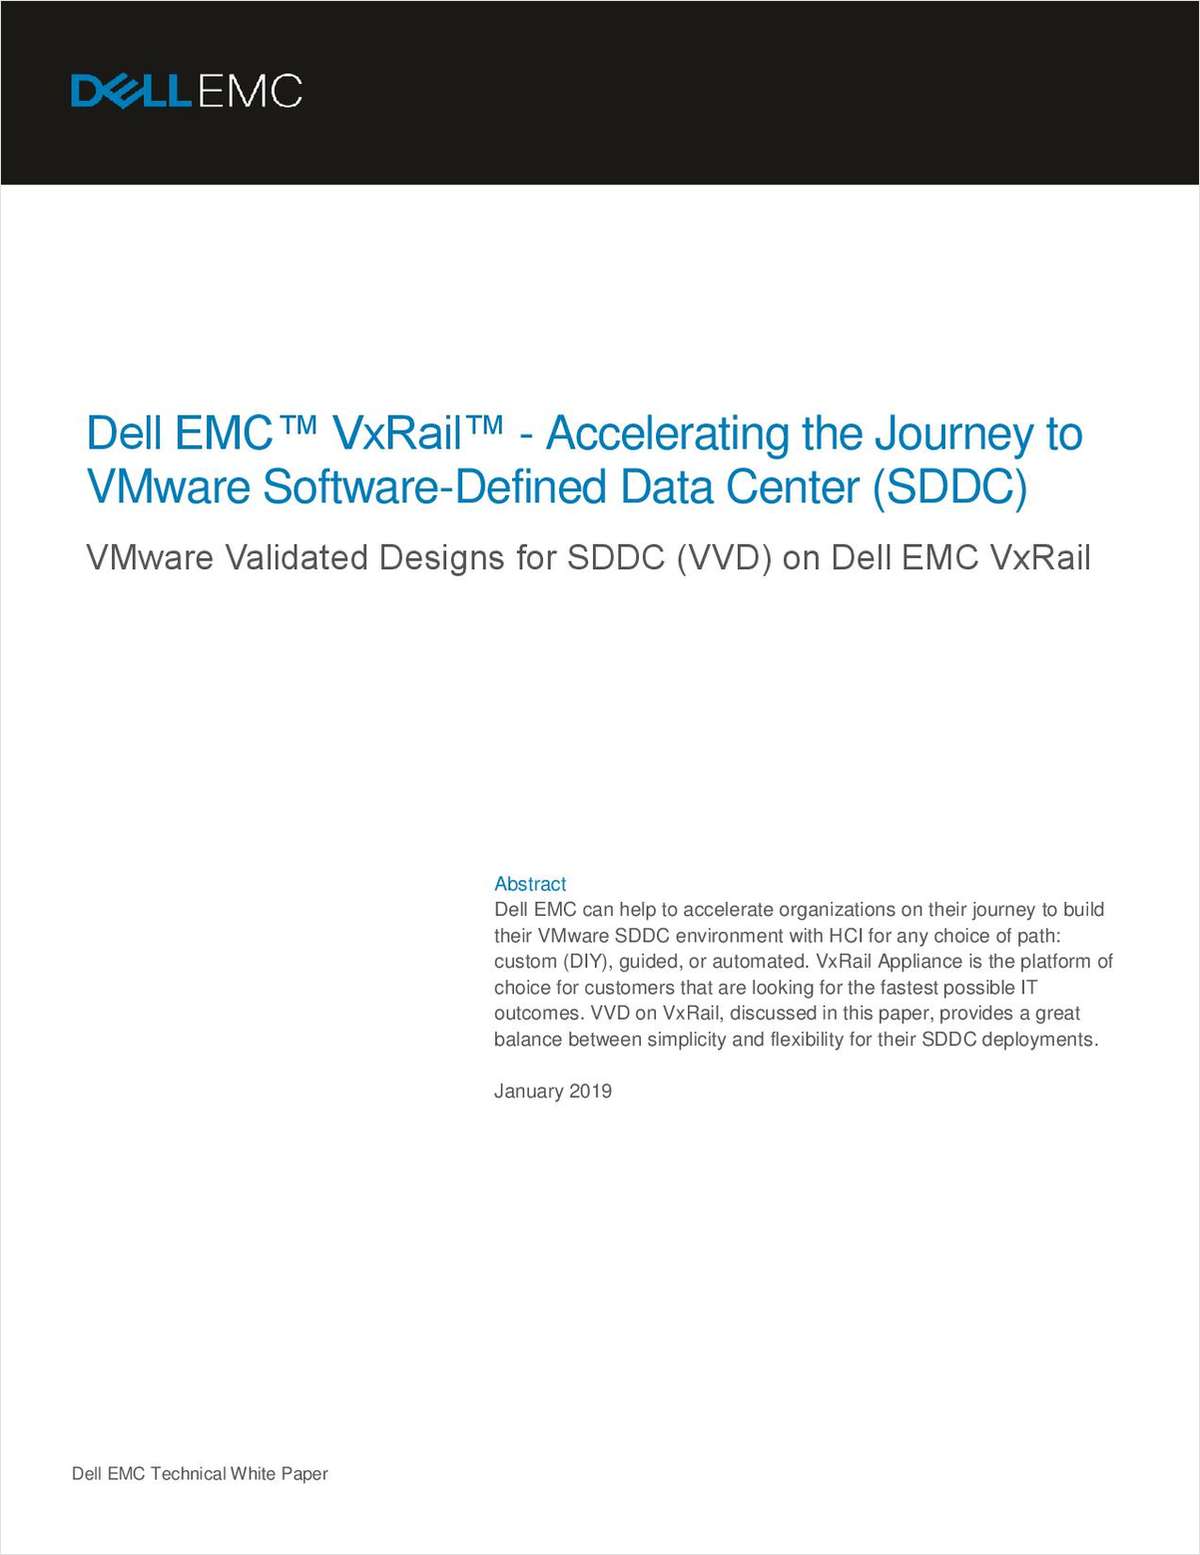 Modernize your IT with Dell EMC VxRail hyperconverged infrastructure